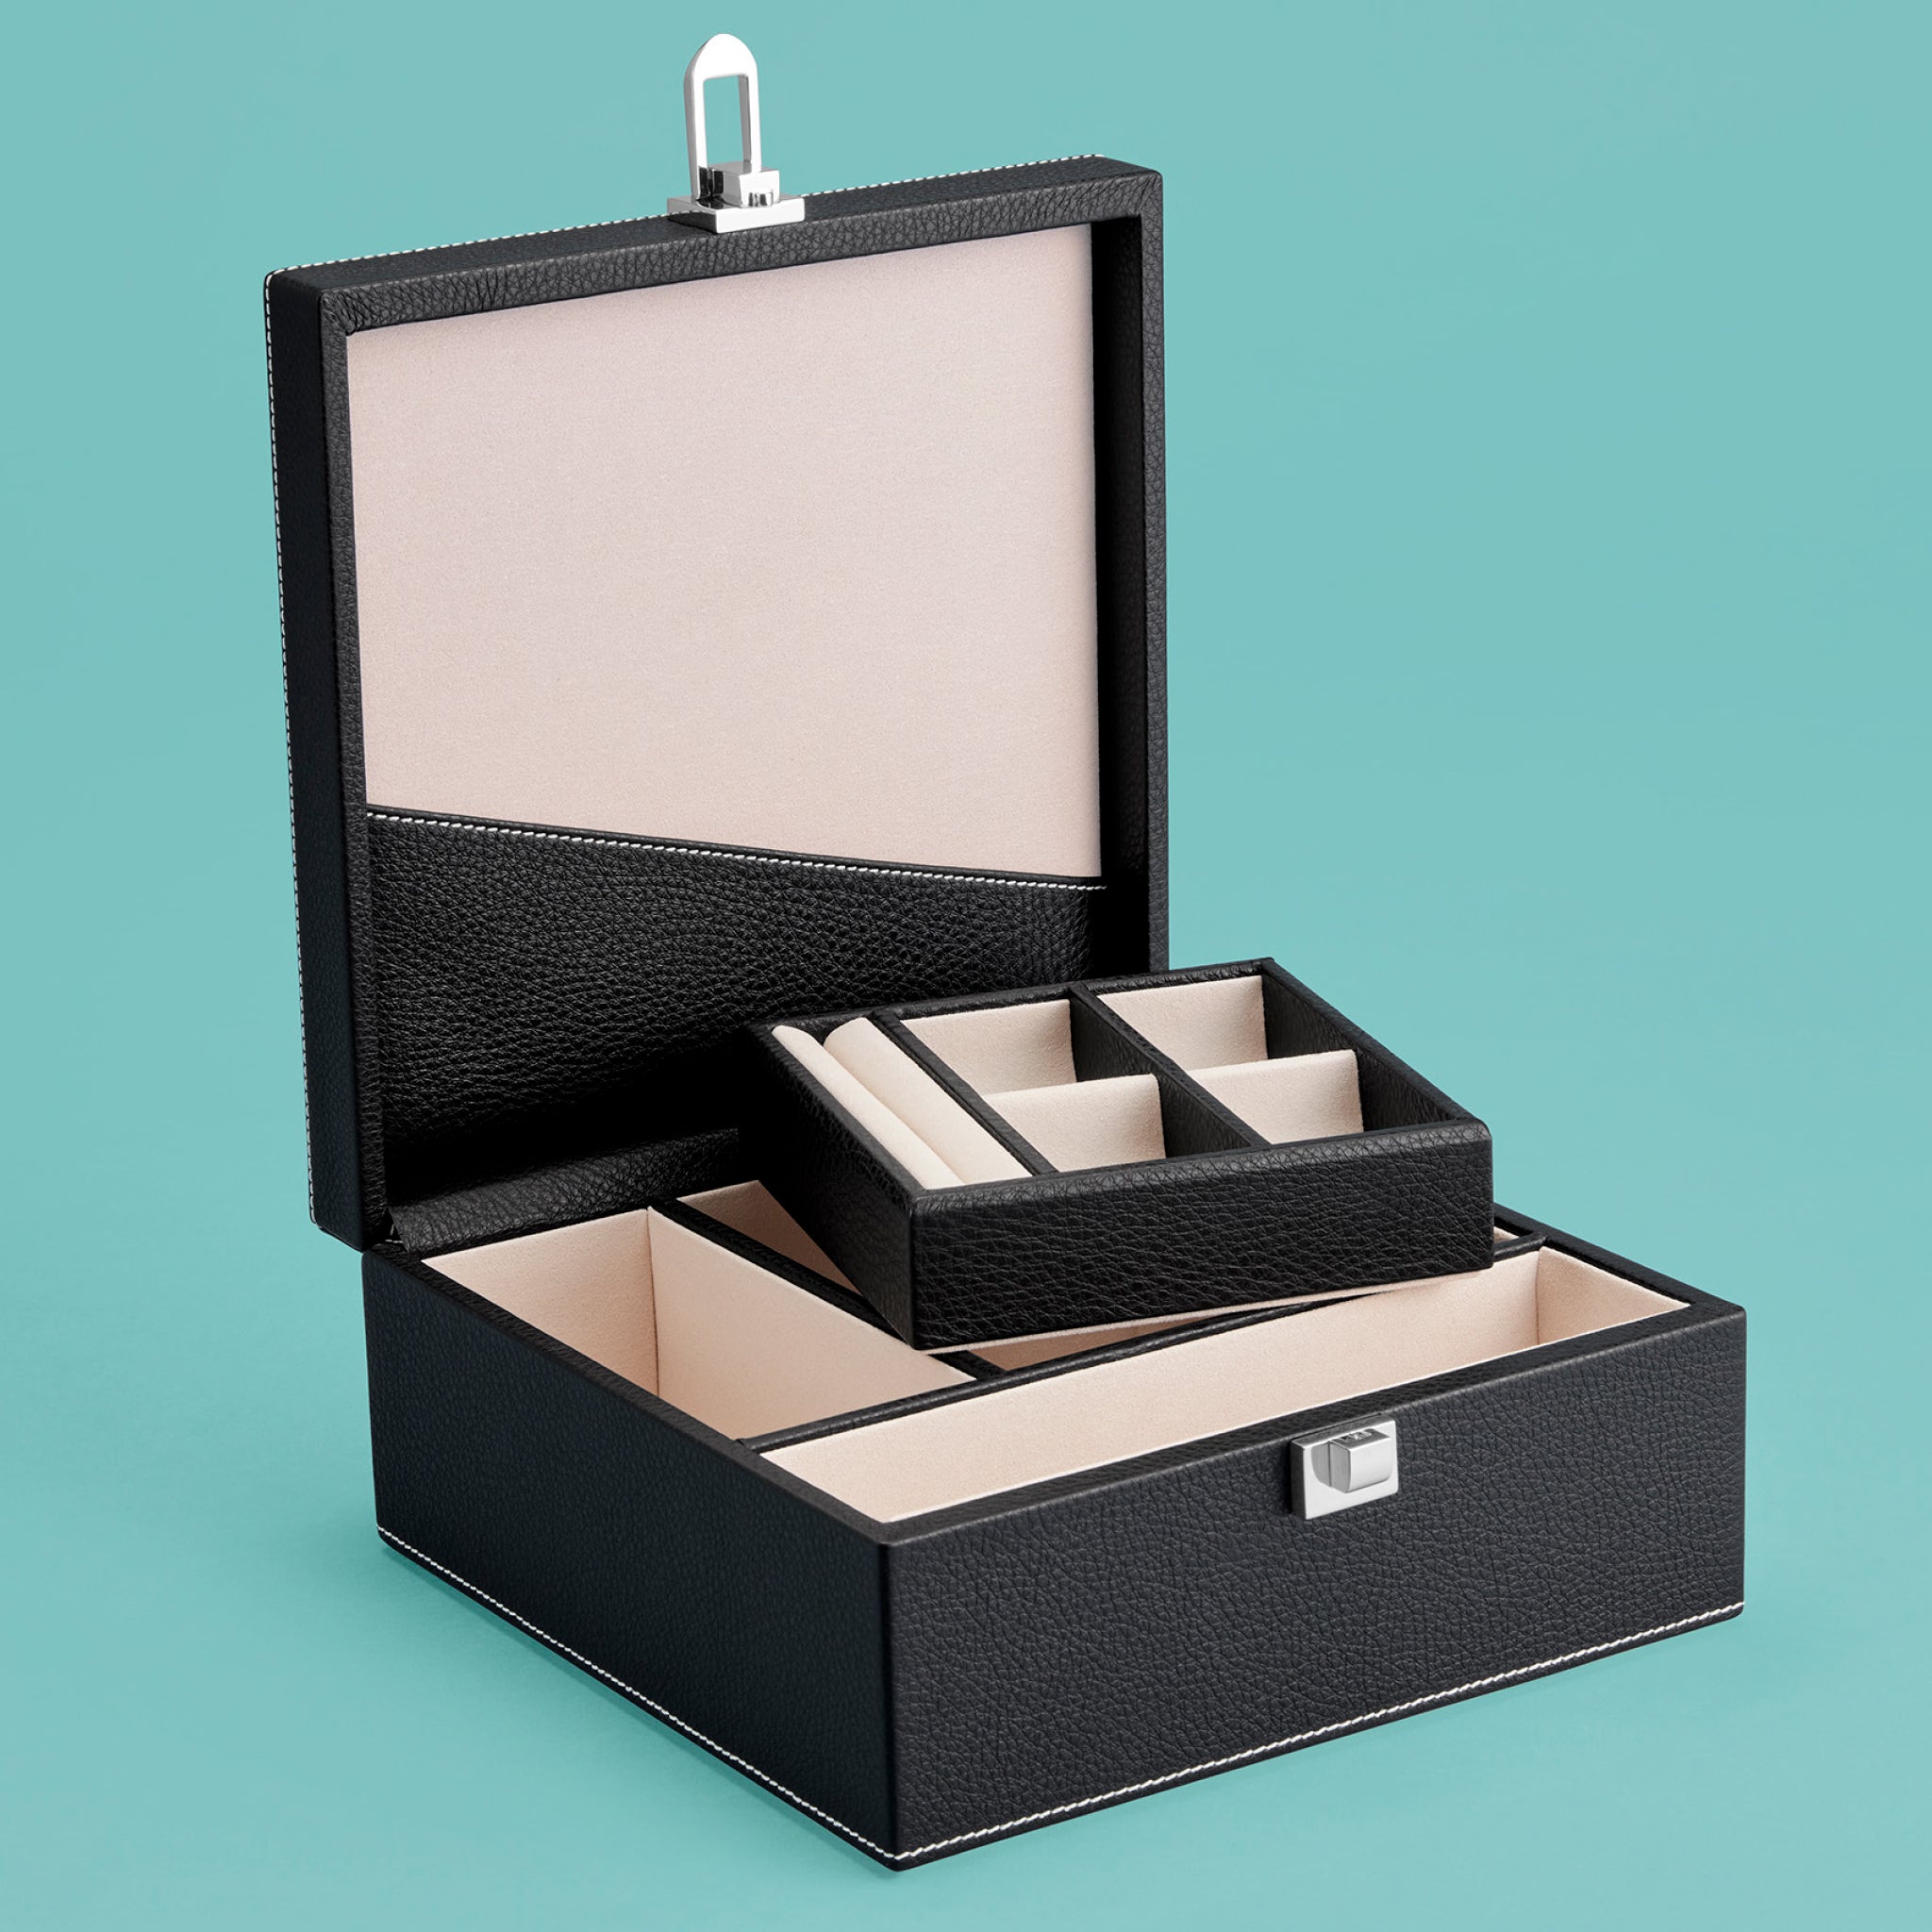 Buy The Wallace Jewelry Box for Men